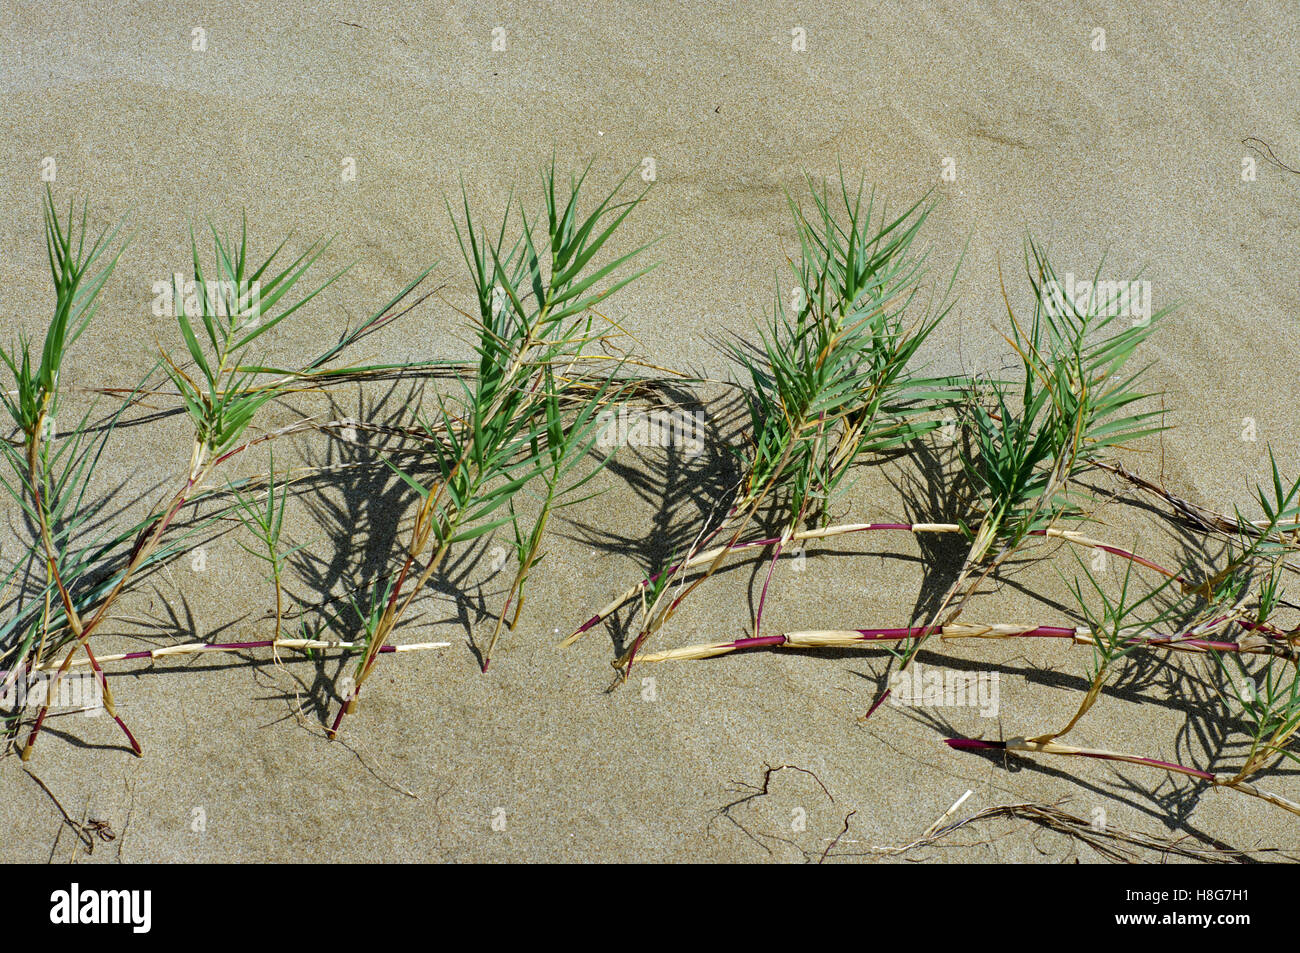 Sporobolus virginicus, the Seashore dropsead or Saltwater couch, a pioneer-plant in the sand dunes, family Poaceae Stock Photo